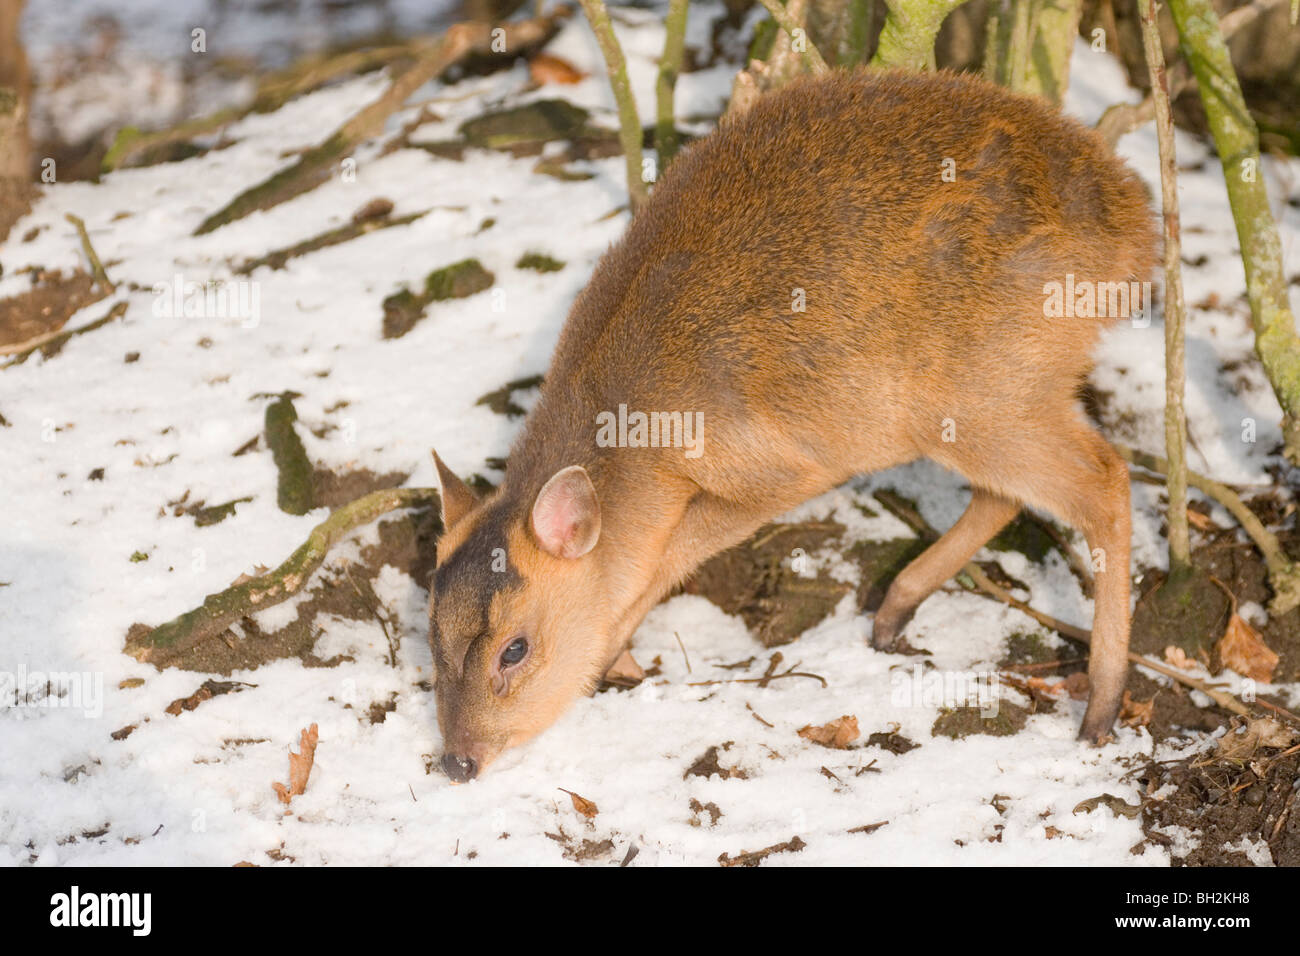 Muntjac Deer Fawn (Muntiacus reevesi). Recently weaned youngster, now seeking solid food in atrocious winter weather. Norfolk. Stock Photo